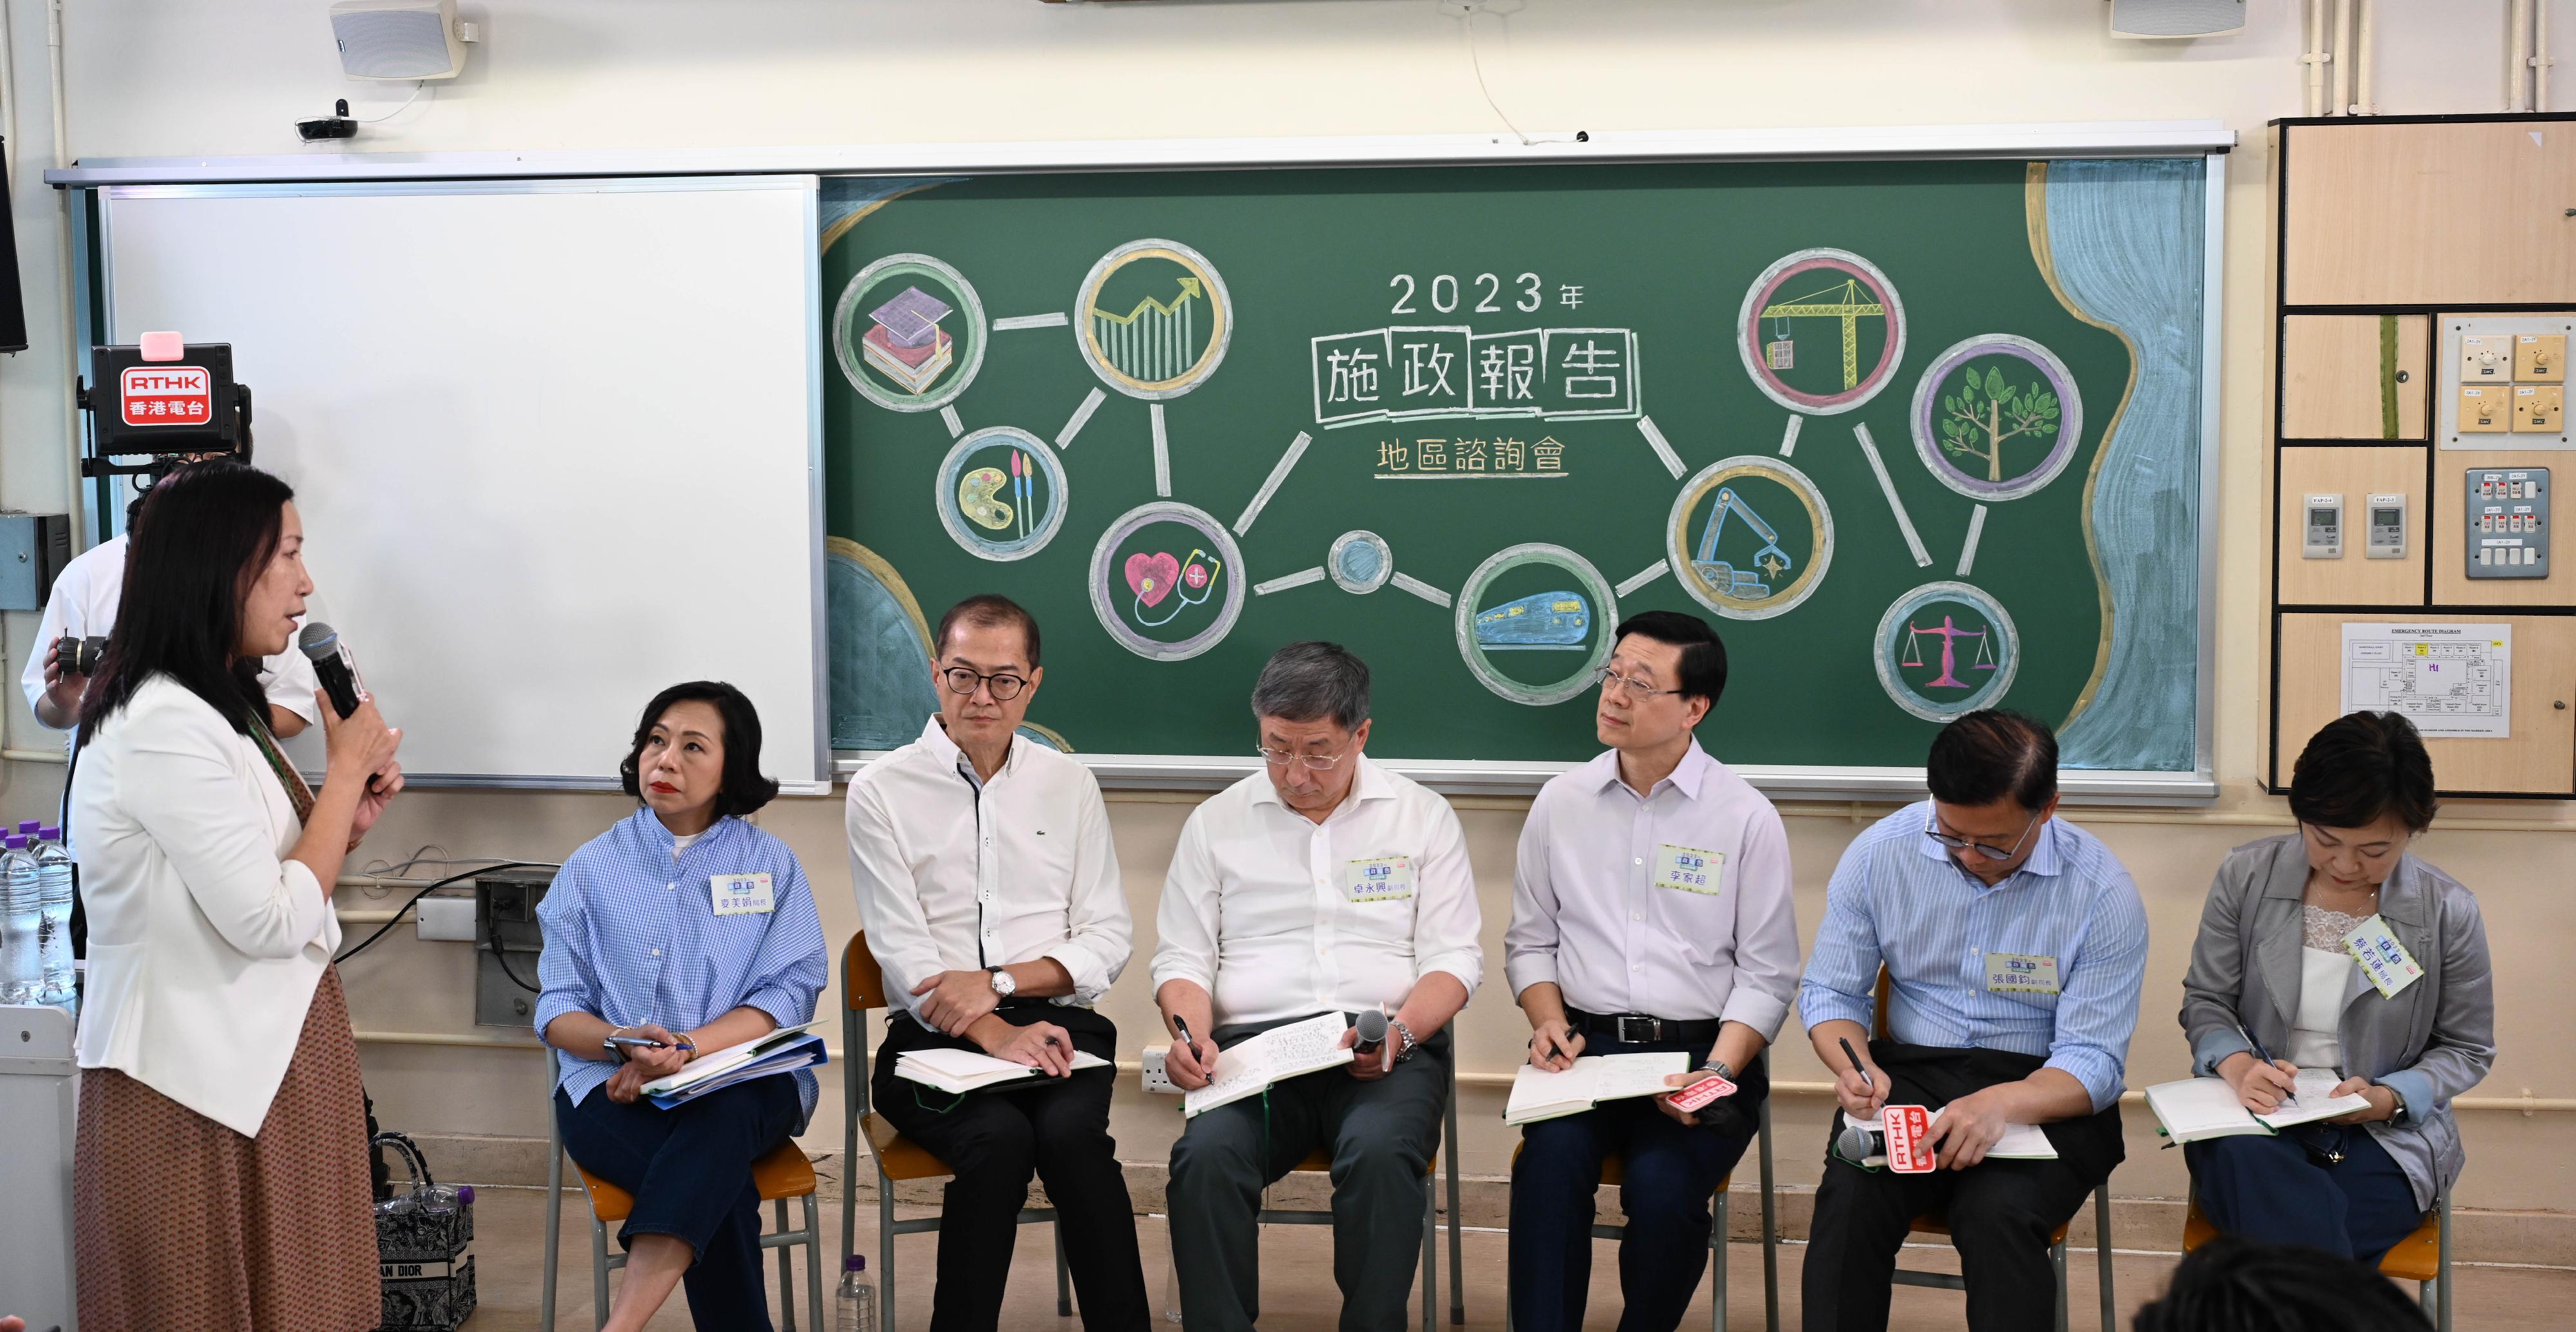 The Chief Executive, Mr John Lee, attended the second 2023 Policy Address District Forum with Principal Officials this morning (August 27) to listen to views and suggestions of local community members on the upcoming Policy Address. Photo shows Mr Lee (third right); the Deputy Chief Secretary for Administration, Mr Cheuk Wing-hing (third left); the Deputy Secretary for Justice, Mr Cheung Kwok-kwan (second right); the Secretary for Health, Professor Lo Chung-mau (second left); the Secretary for Education, Dr Choi Yuk-lin (first right); and the Secretary for Home and Youth Affairs, Miss Alice Mak (first left), listening to views of the public at the consultation session.